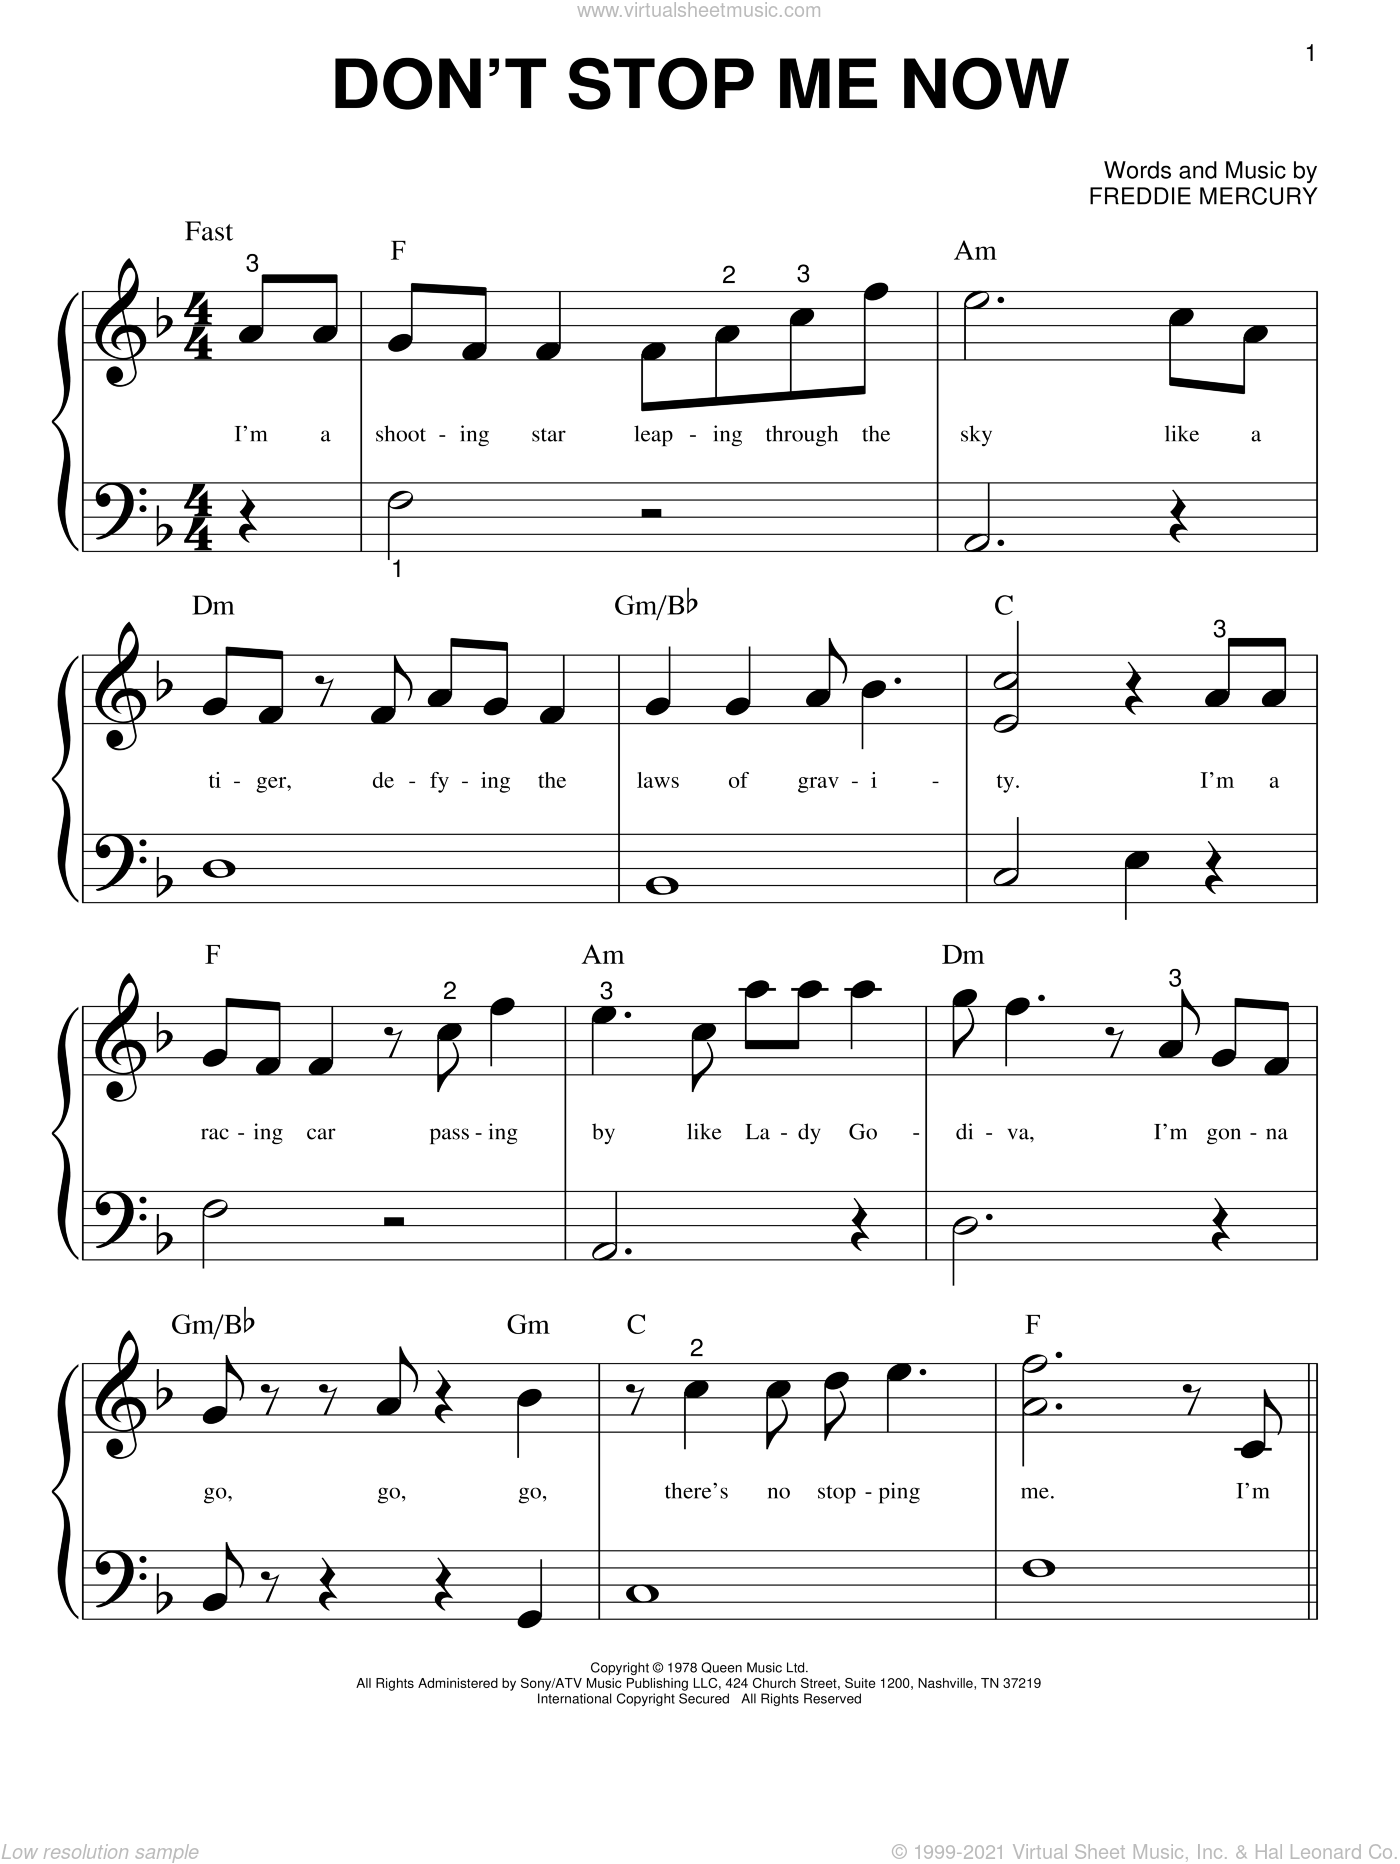 Queen - Don't Stop Me Now sheet music for piano solo (big note book)